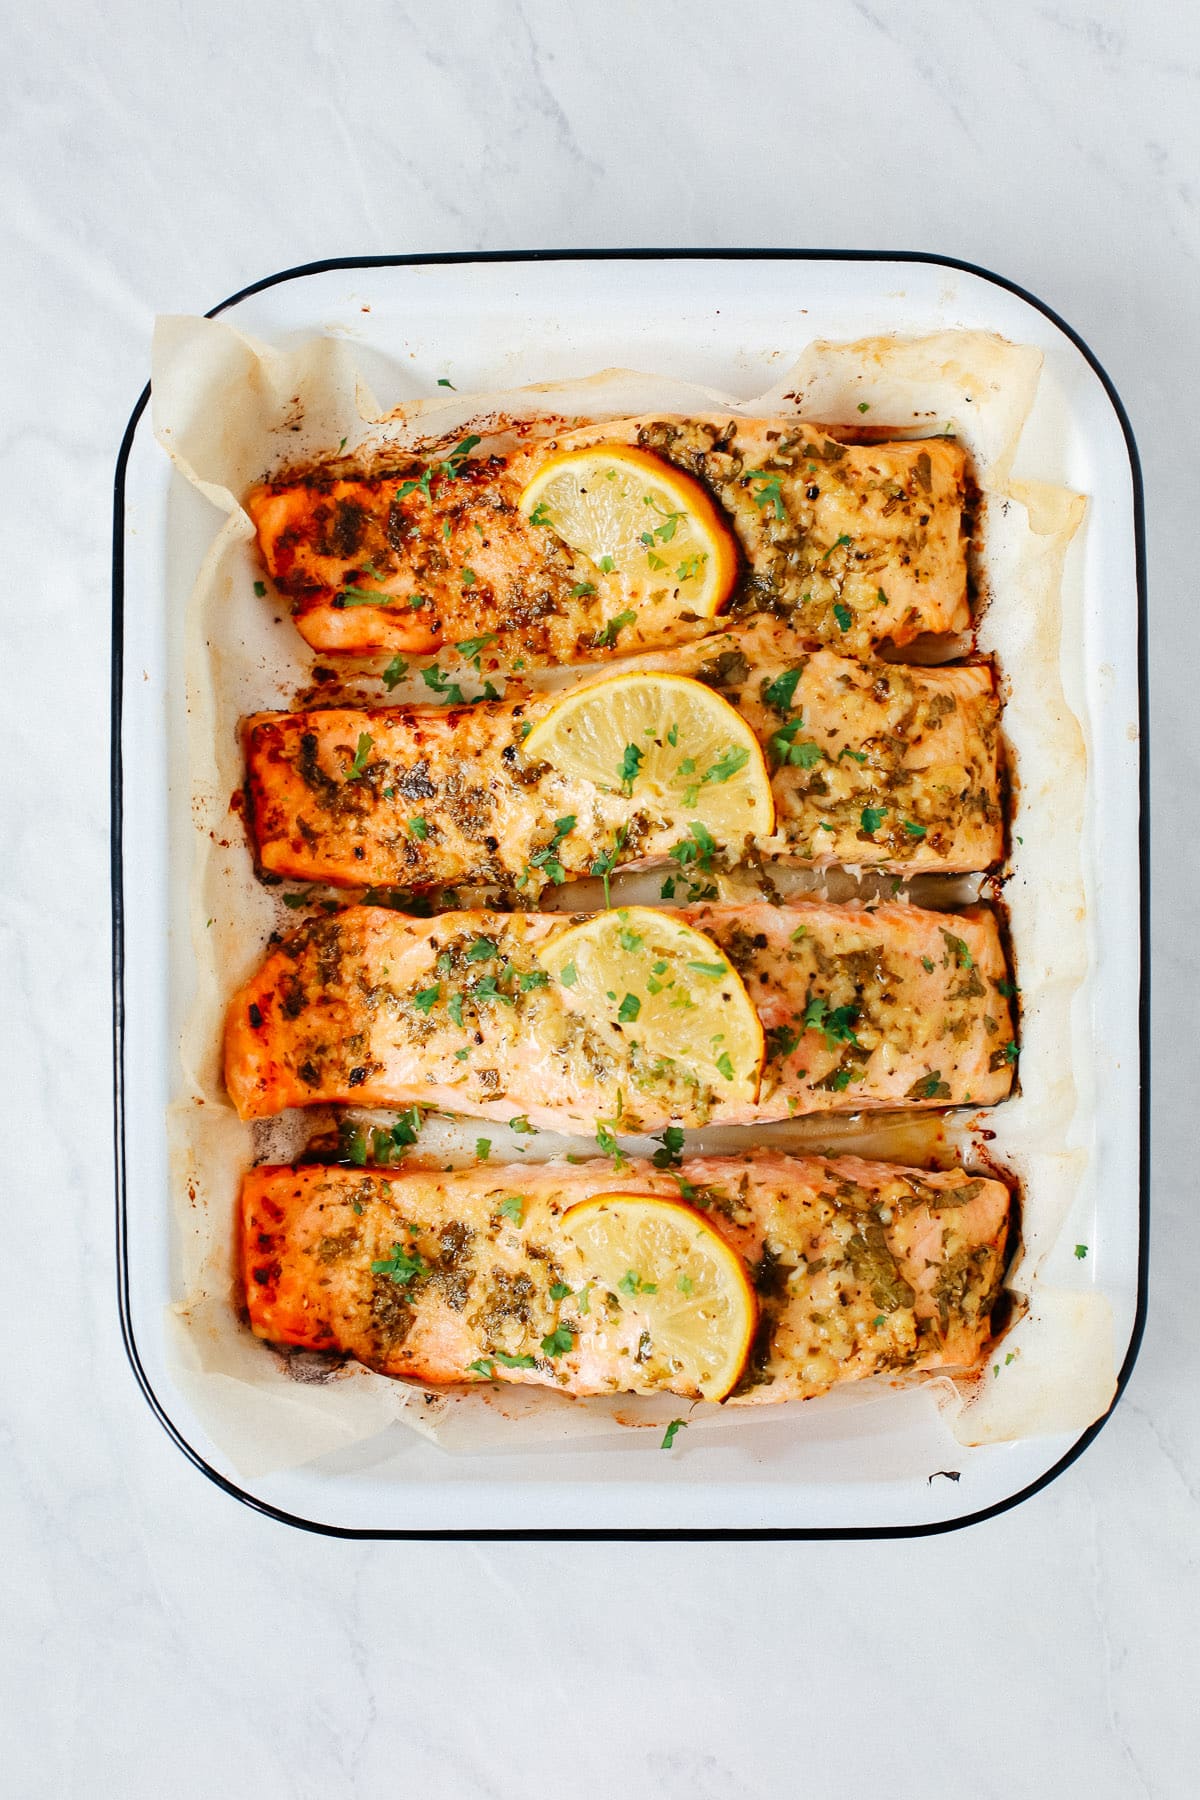 A close up of 4 pieces of salmon in a baking sheet